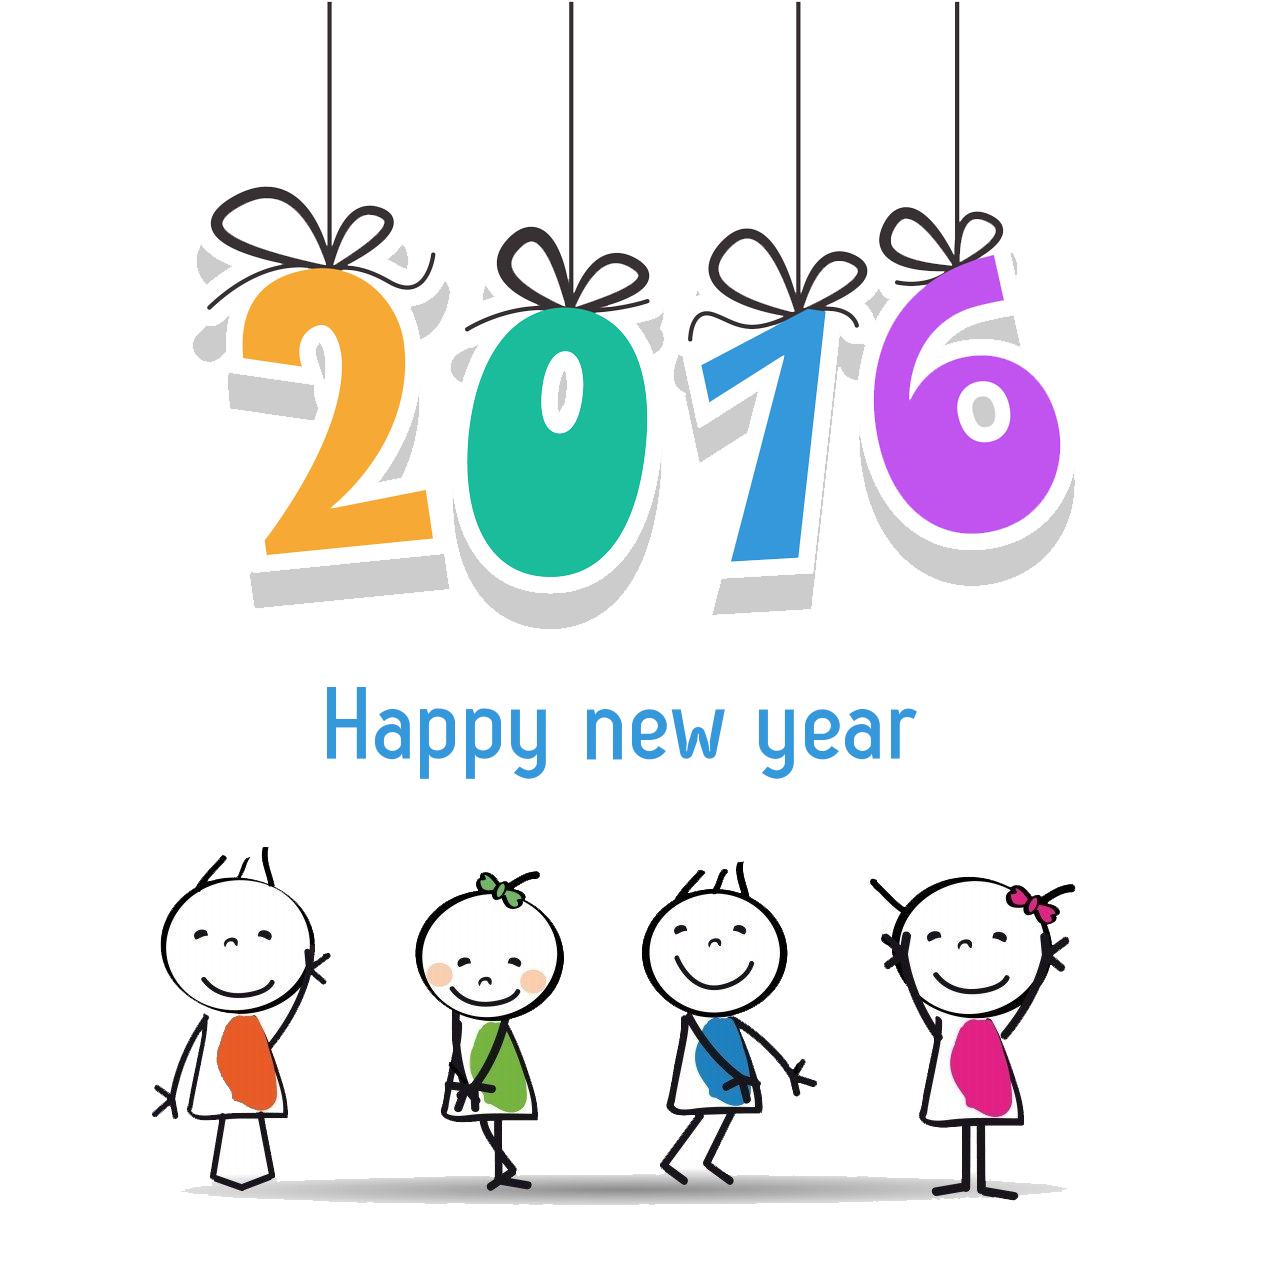 new years 2016 clipart - Clipground